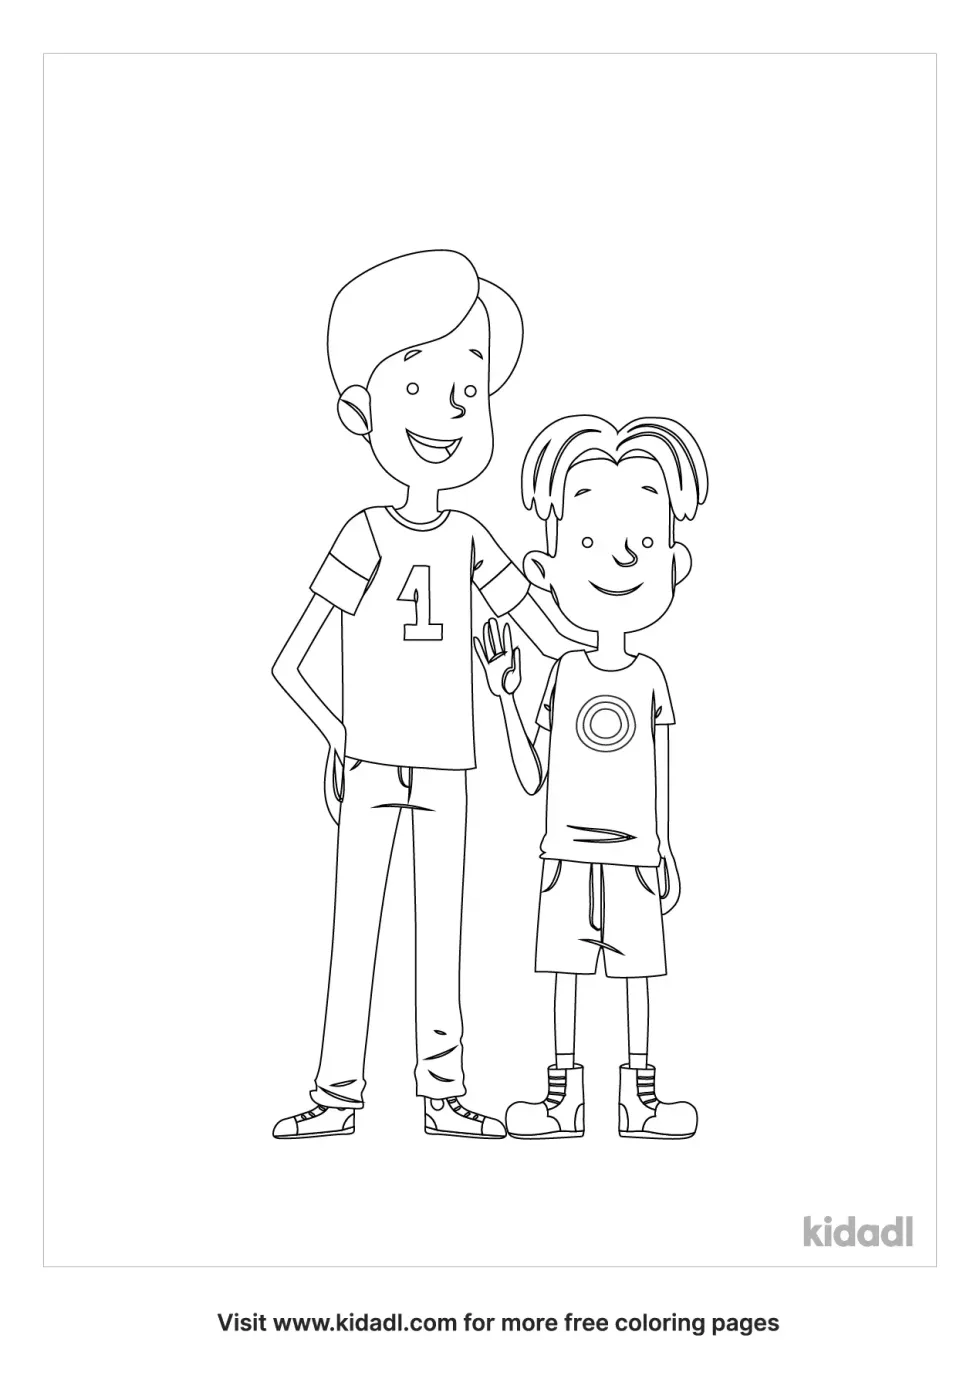 Best Big Brother Coloring Page